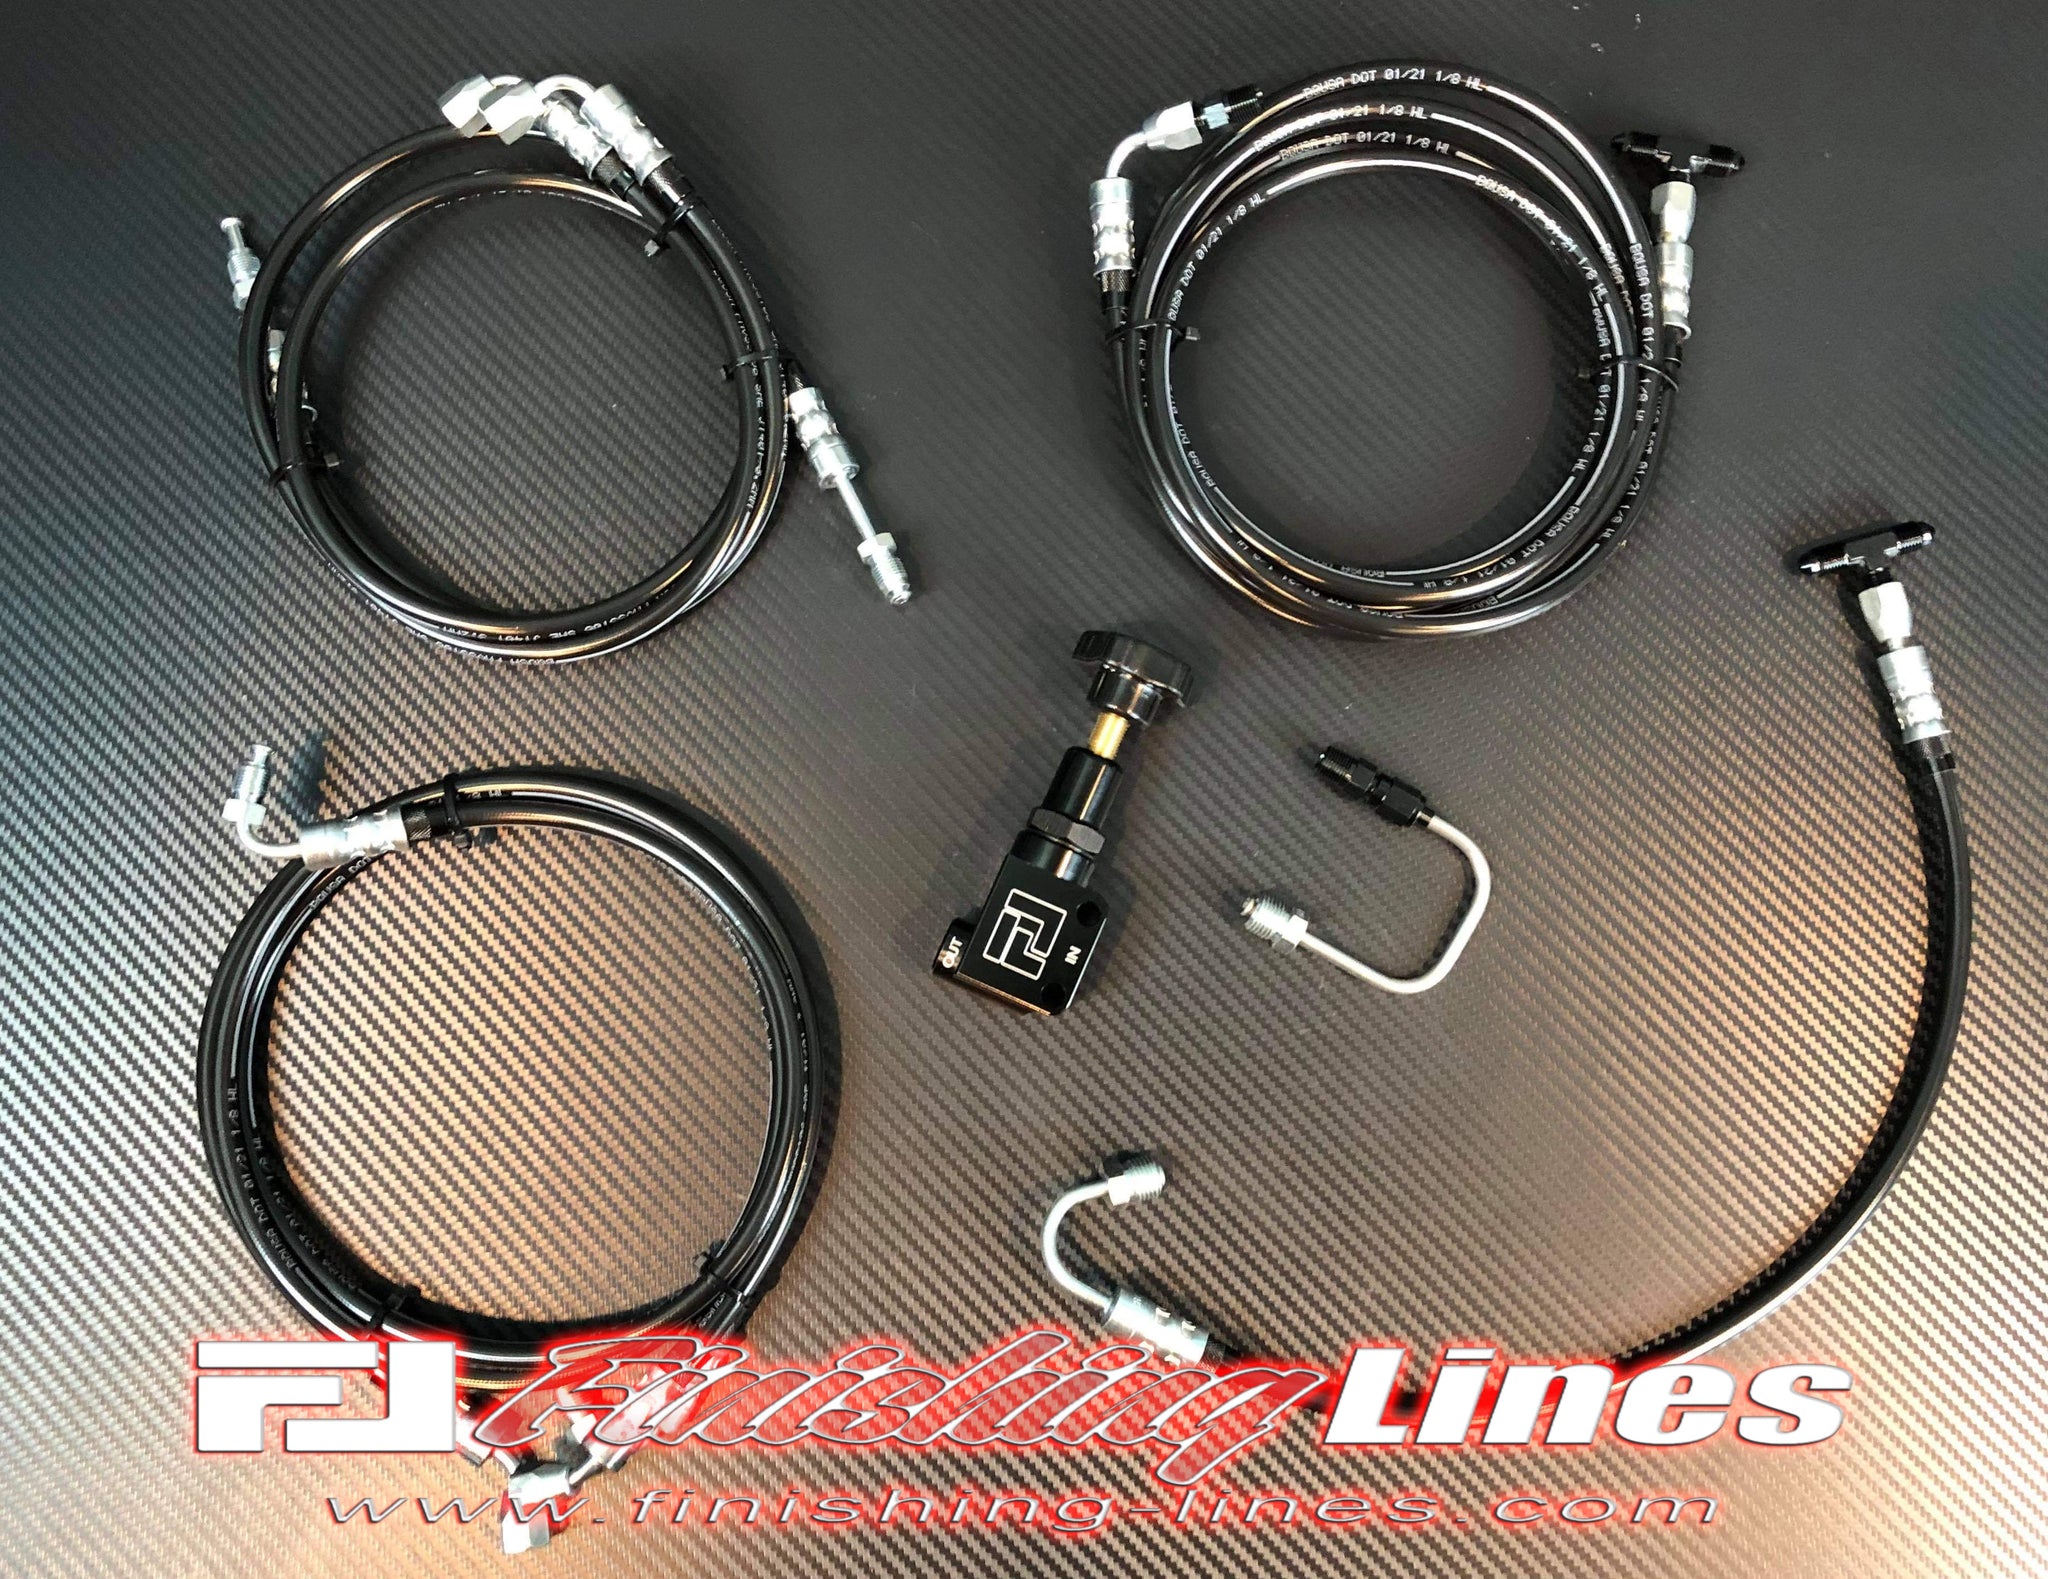 F-Body 4th Gen 93-97 ABS Delete Brake Line Kit - Stock Master Cylinders (Dual M11 Ports)